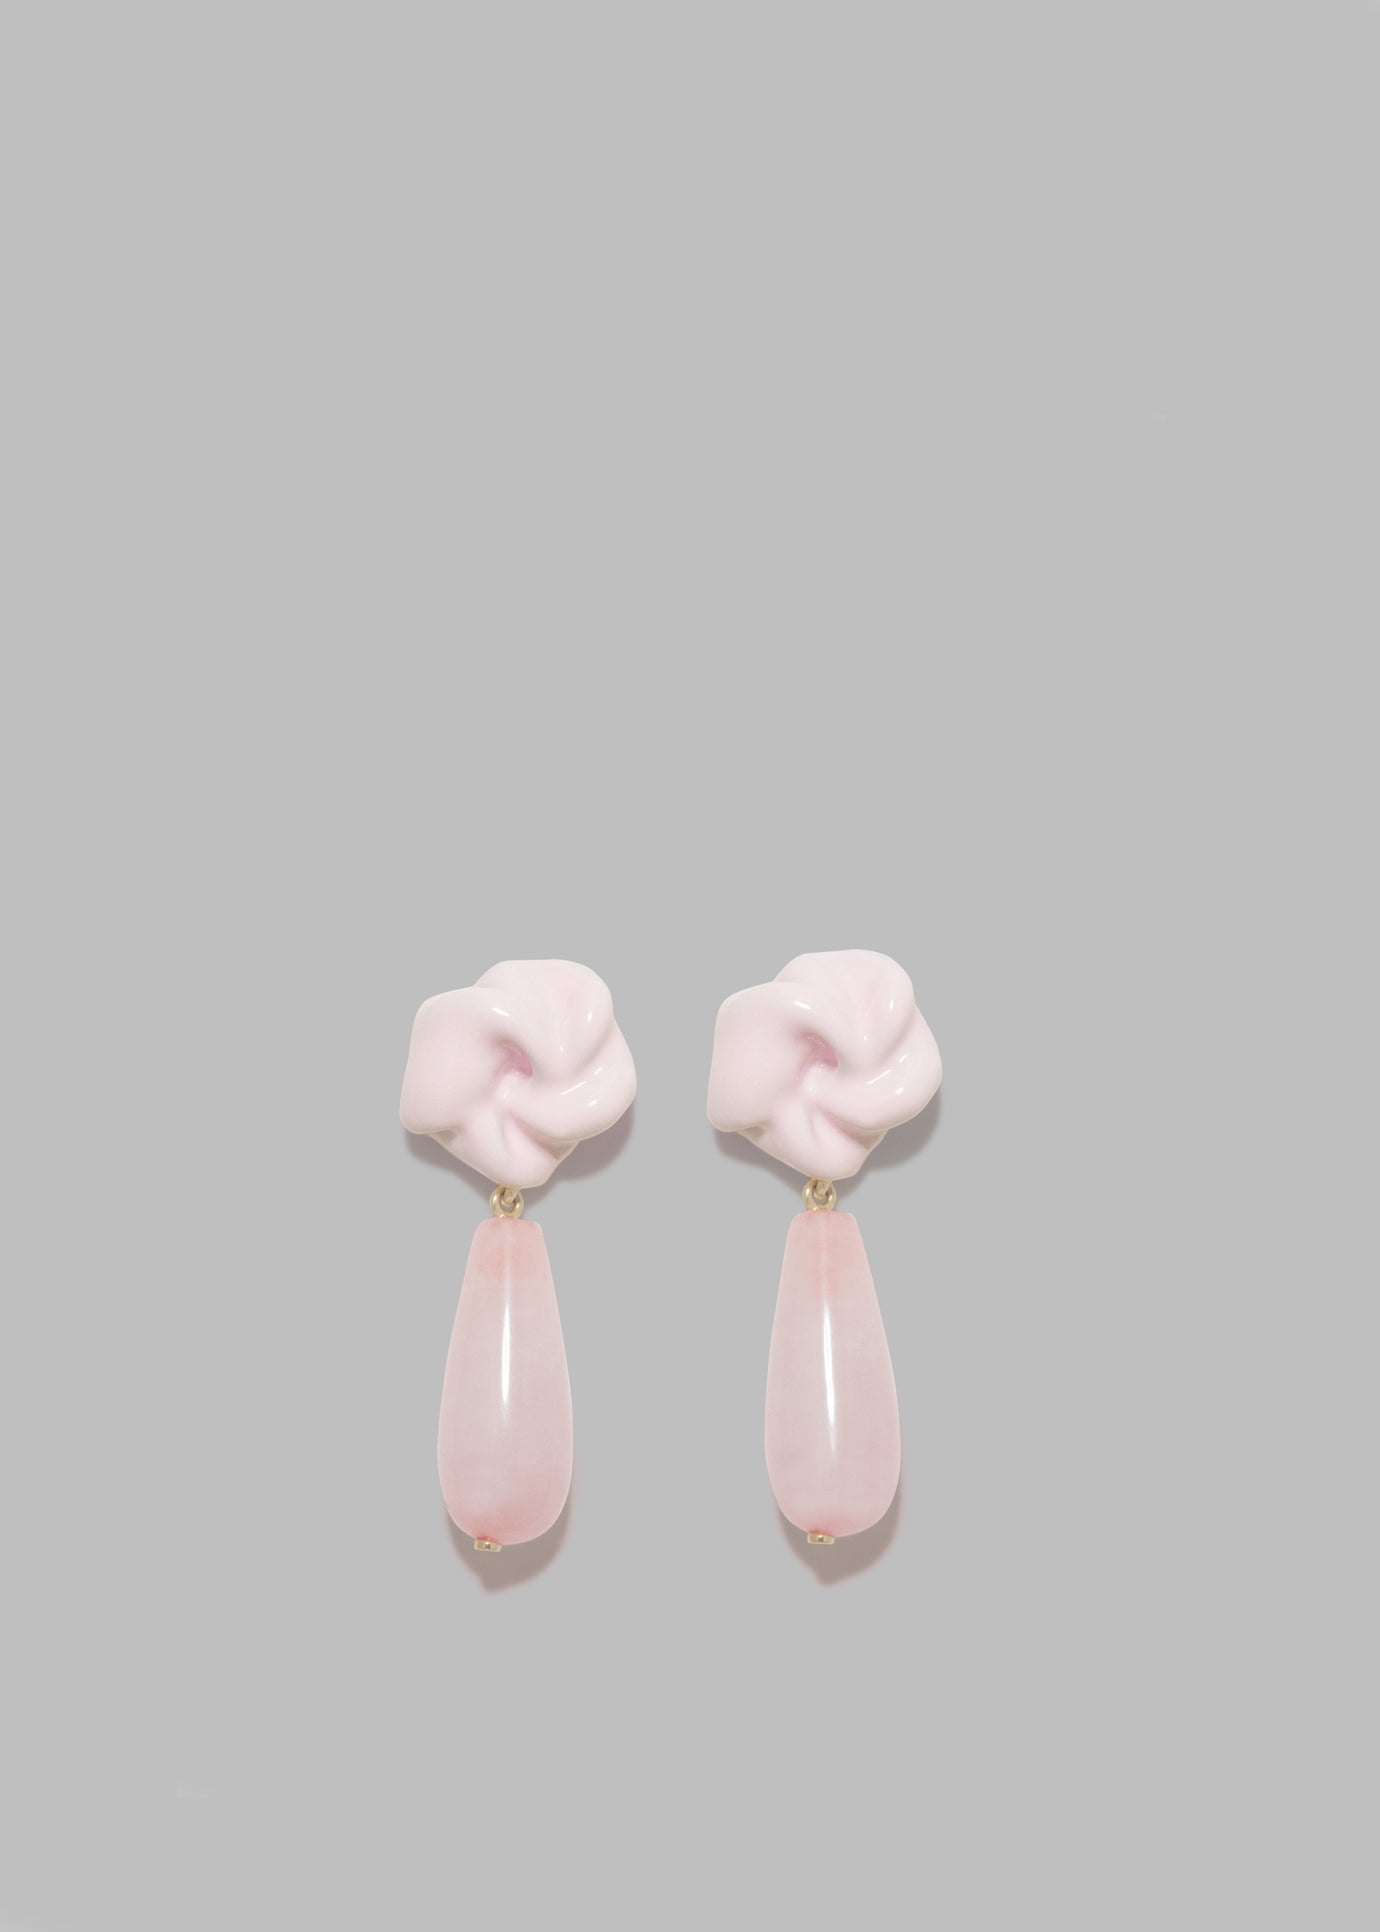 Completedworks The Depths of Time Earrings - Pink